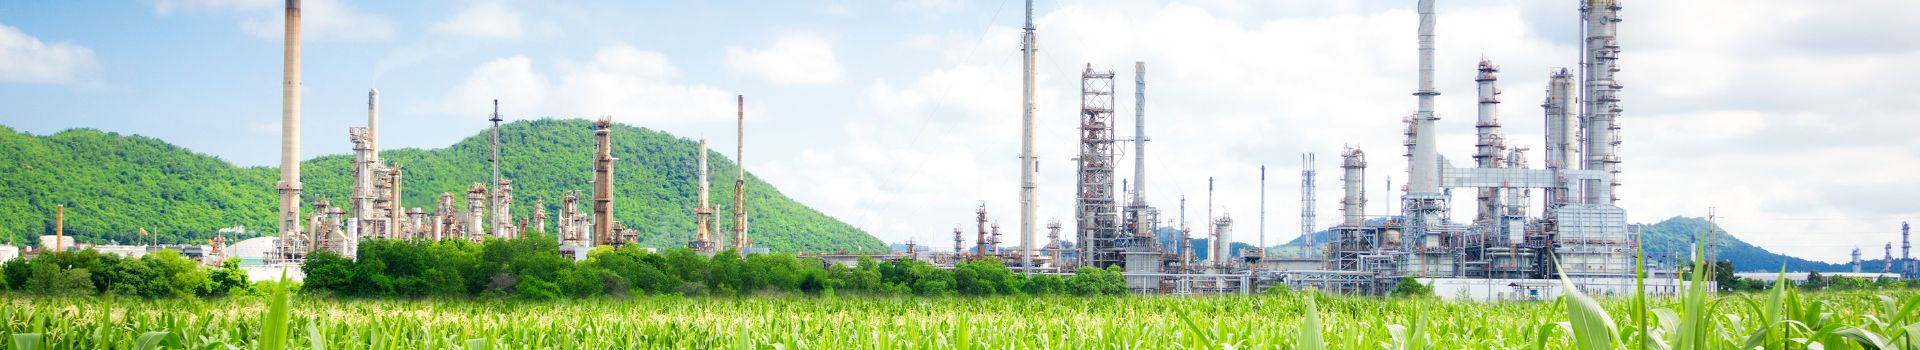 oil refinery in bright daylight on blue sky background with green grass in foreground